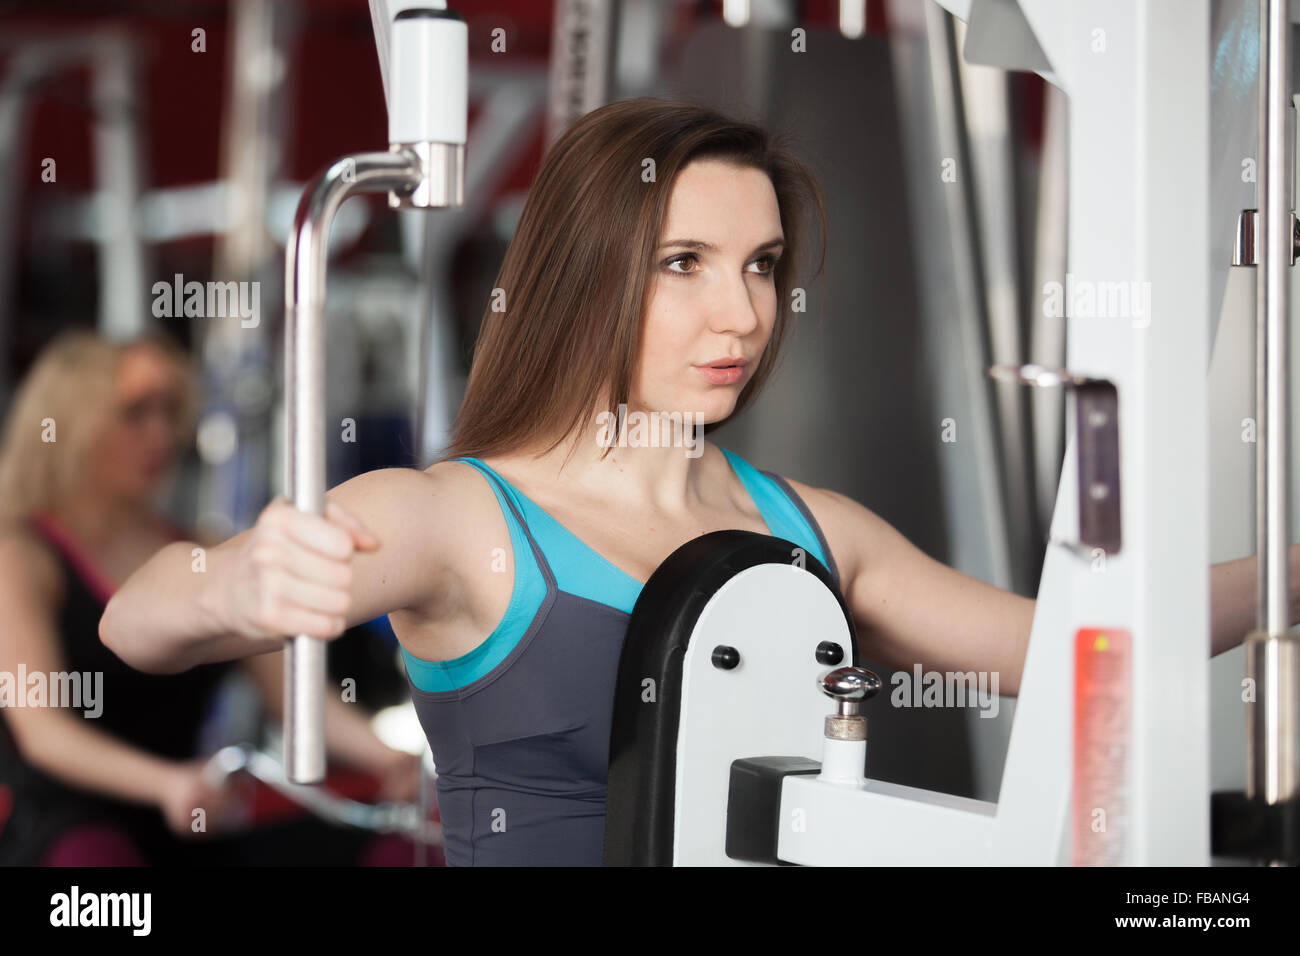 Girl in sportswear exhales while doing exercises for arms and shoulders on training apparatus in fitness center Stock Photo